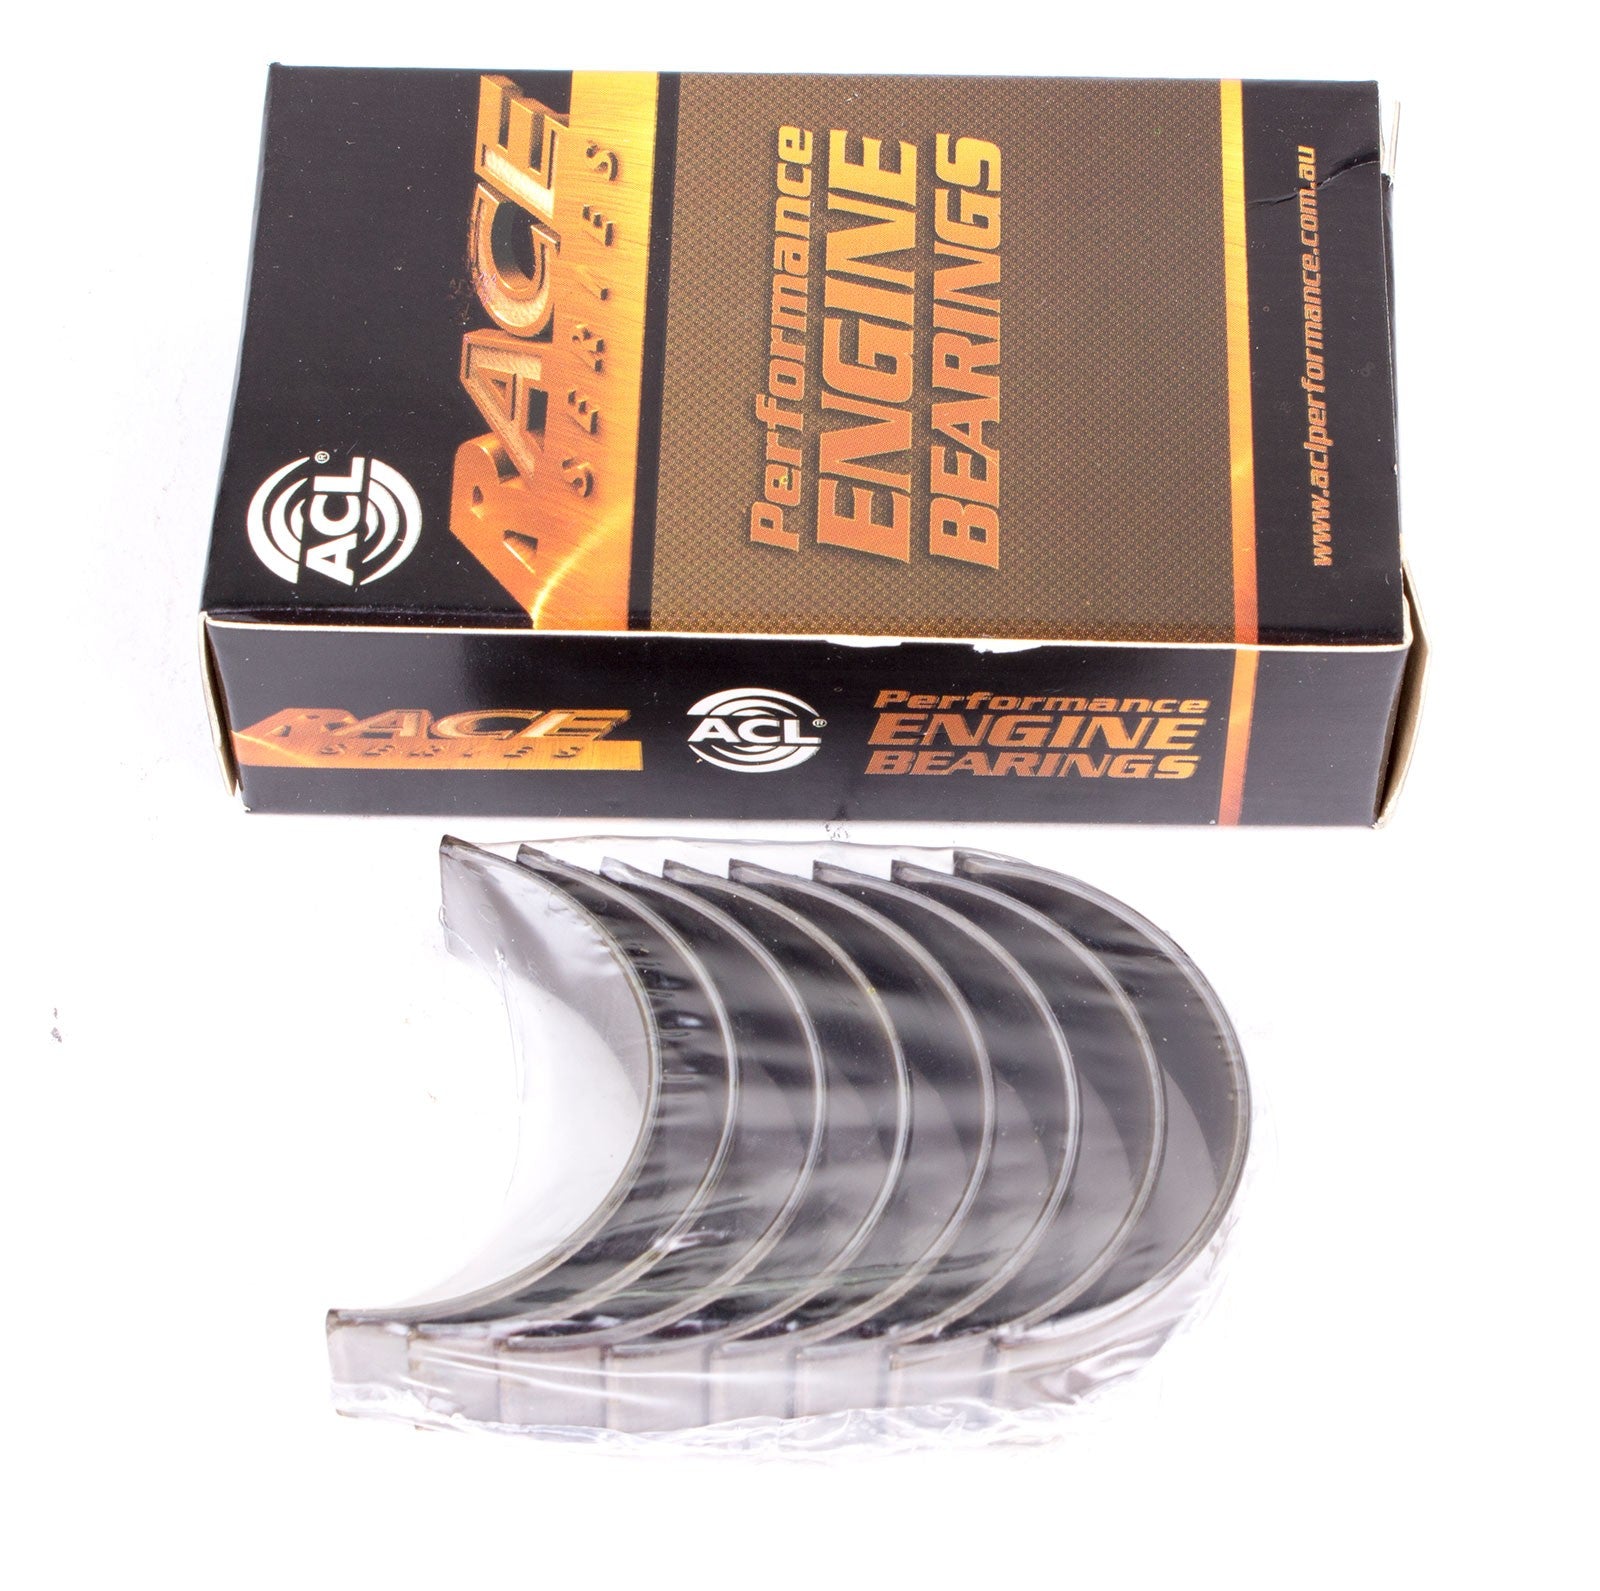 ACL 5M2908H-.025 Main bearing set (ACL Race Series) Photo-0 